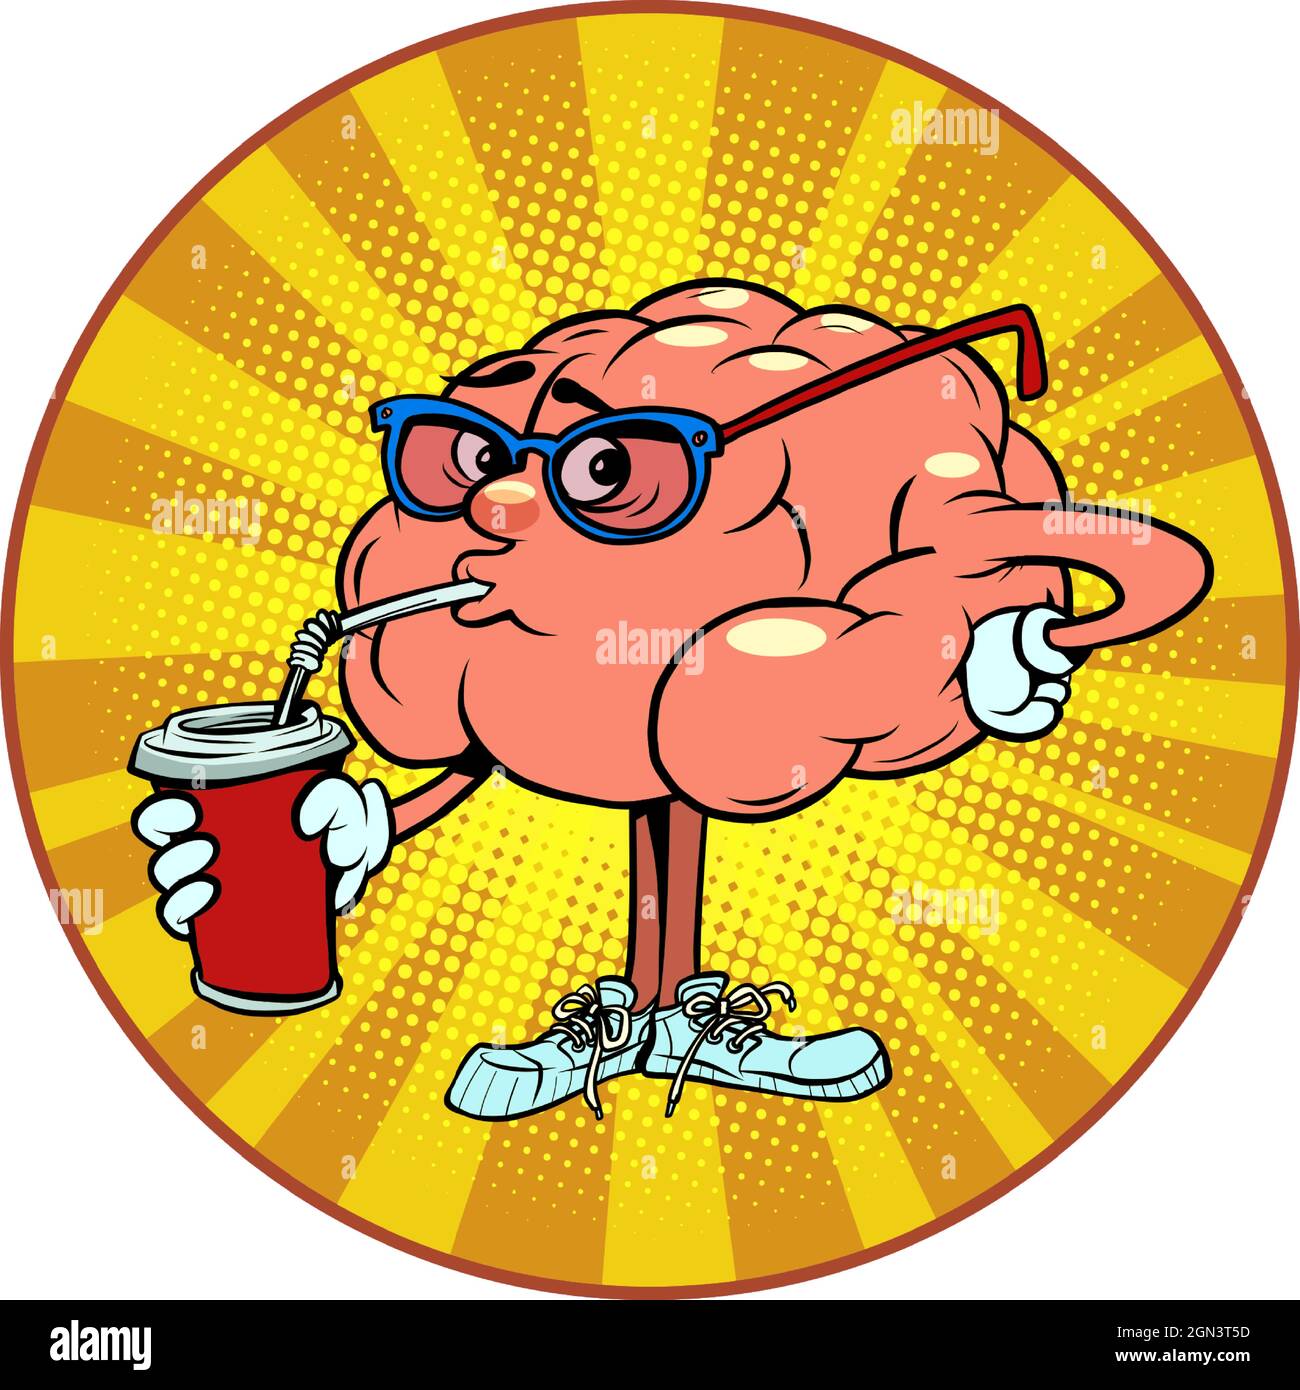 drinks a cold drink cola human brain character, smart wise Stock Vector